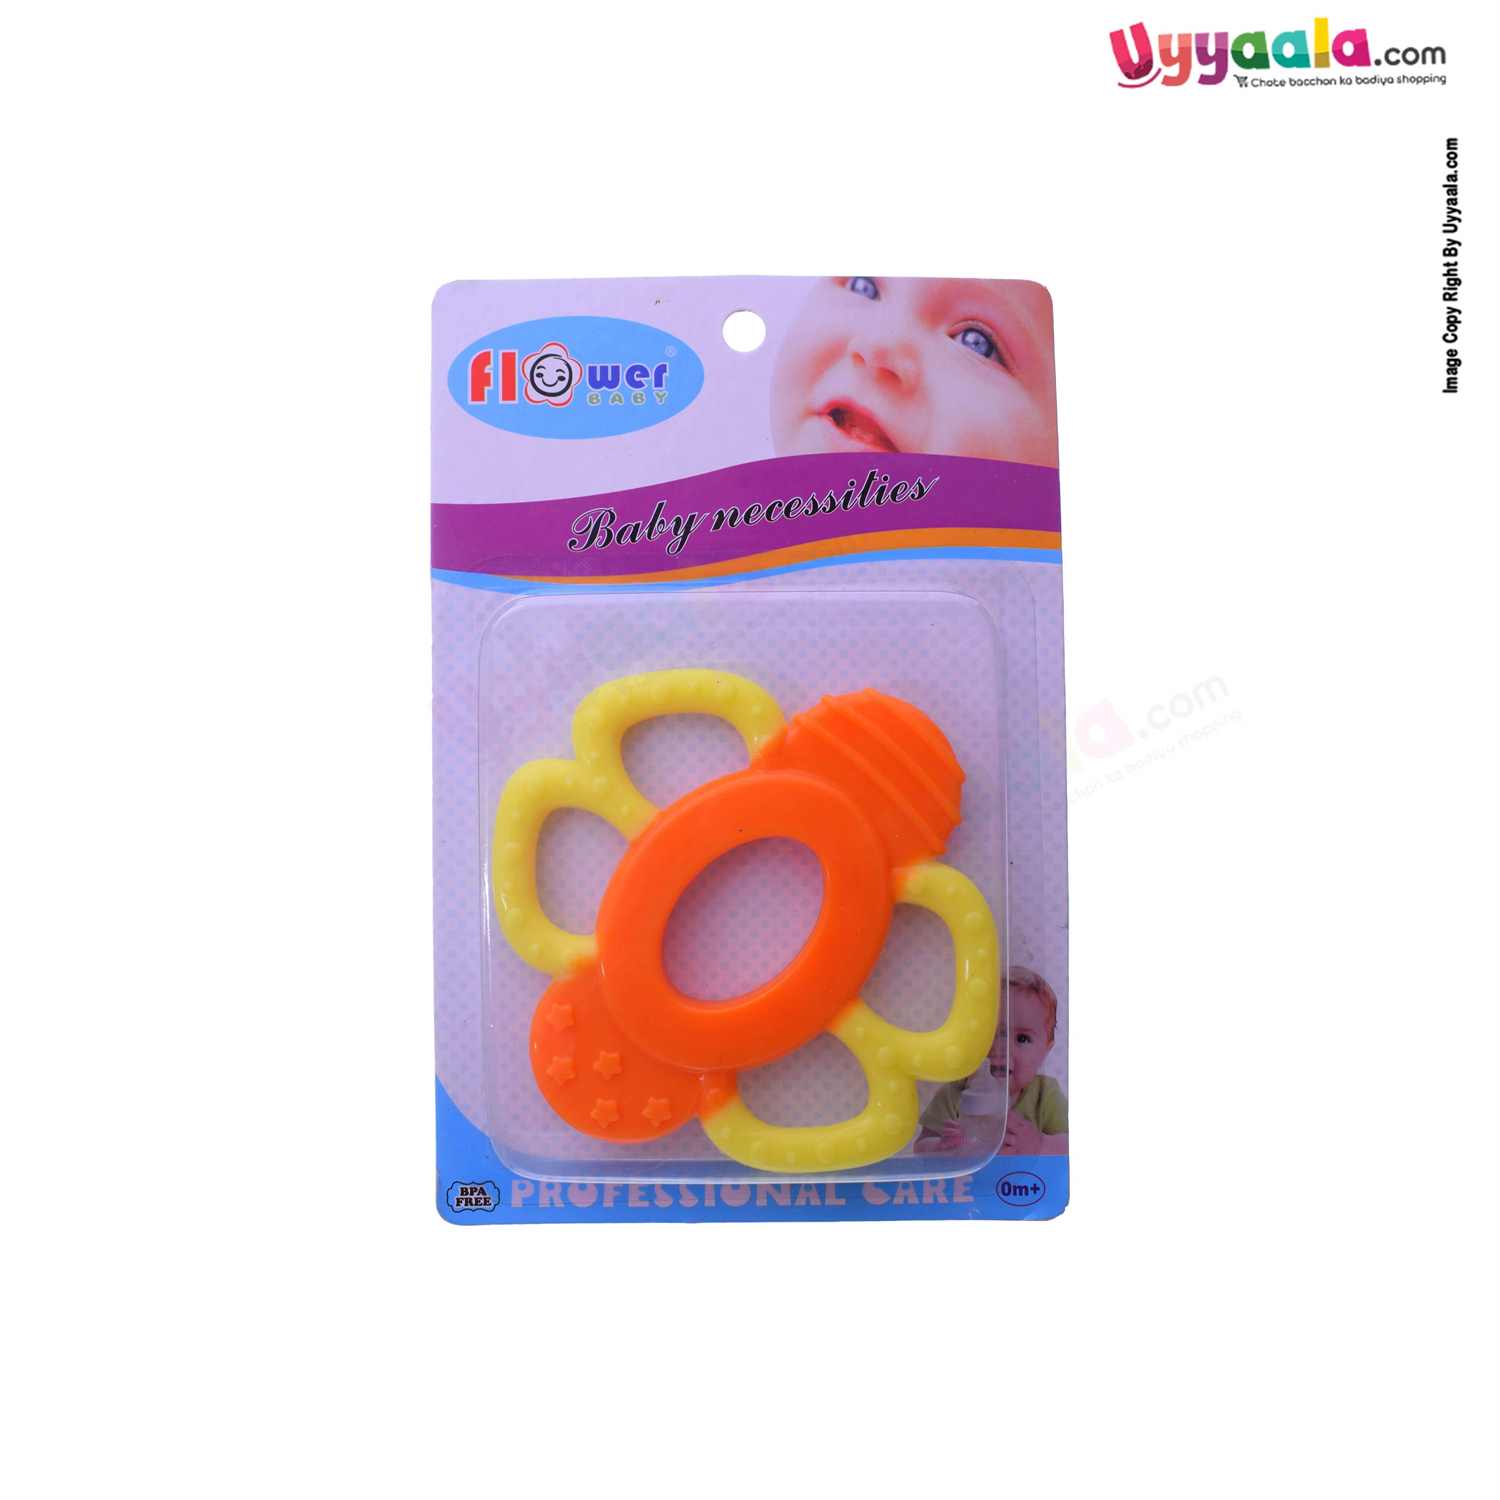 FLOWER BABY Silicone Teether For Babies Butterfly Shape 0+m Age - Yellow, Orange